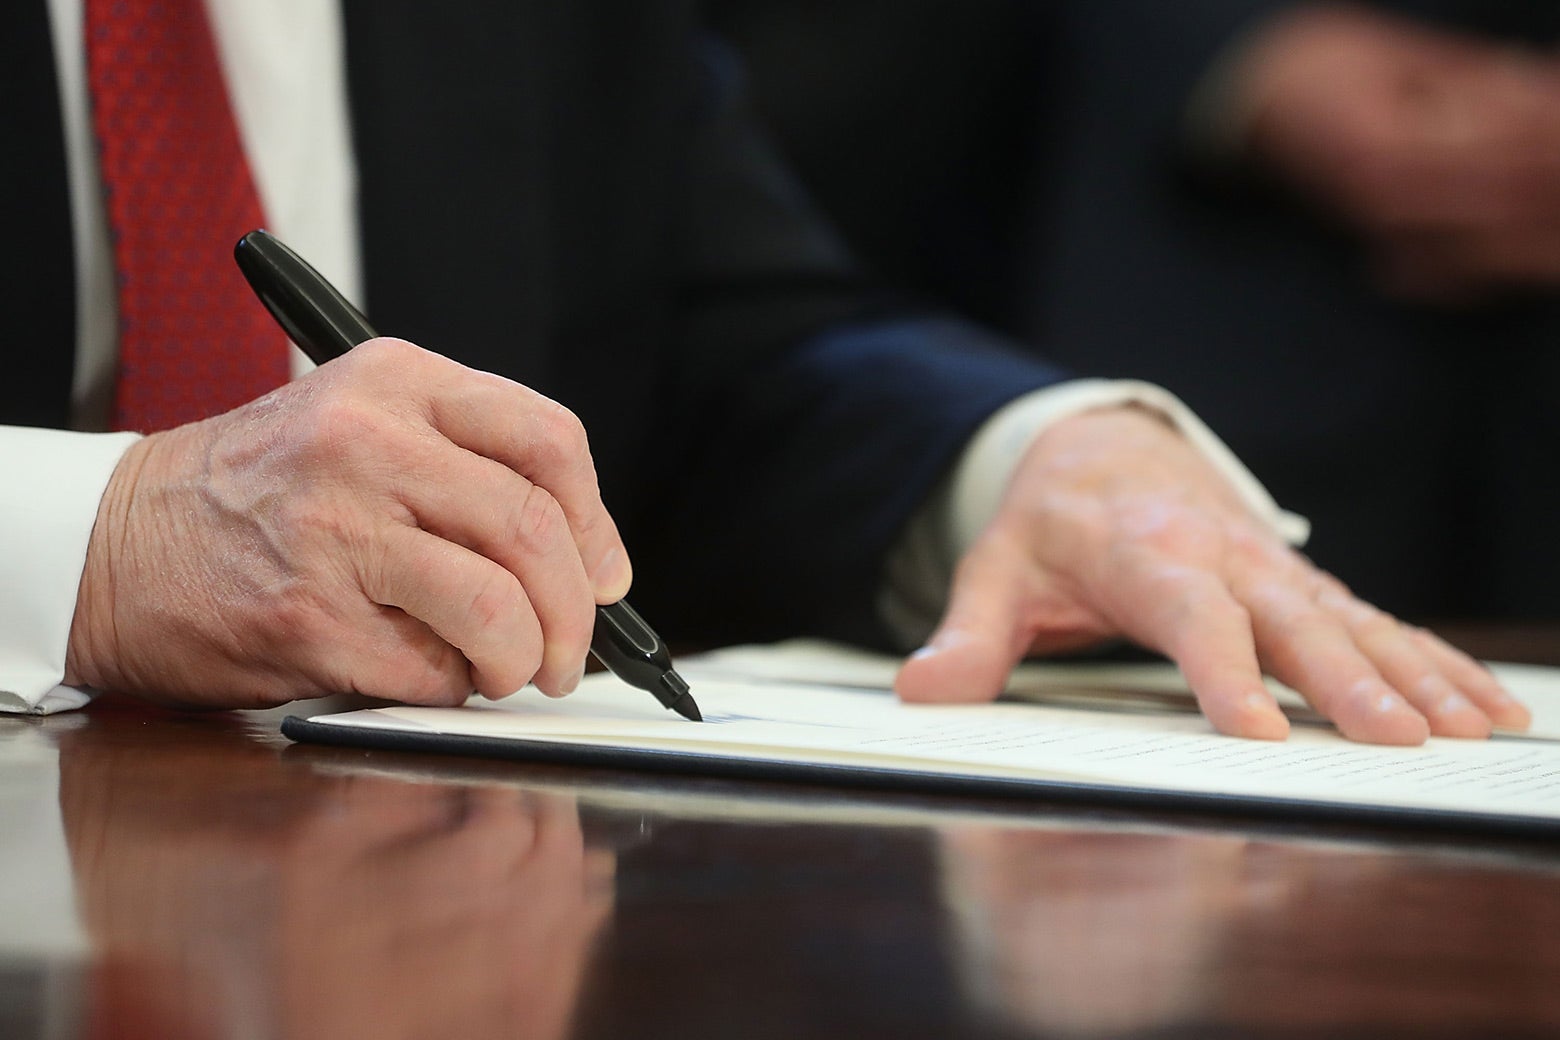 Trump signing a paper with a pen.